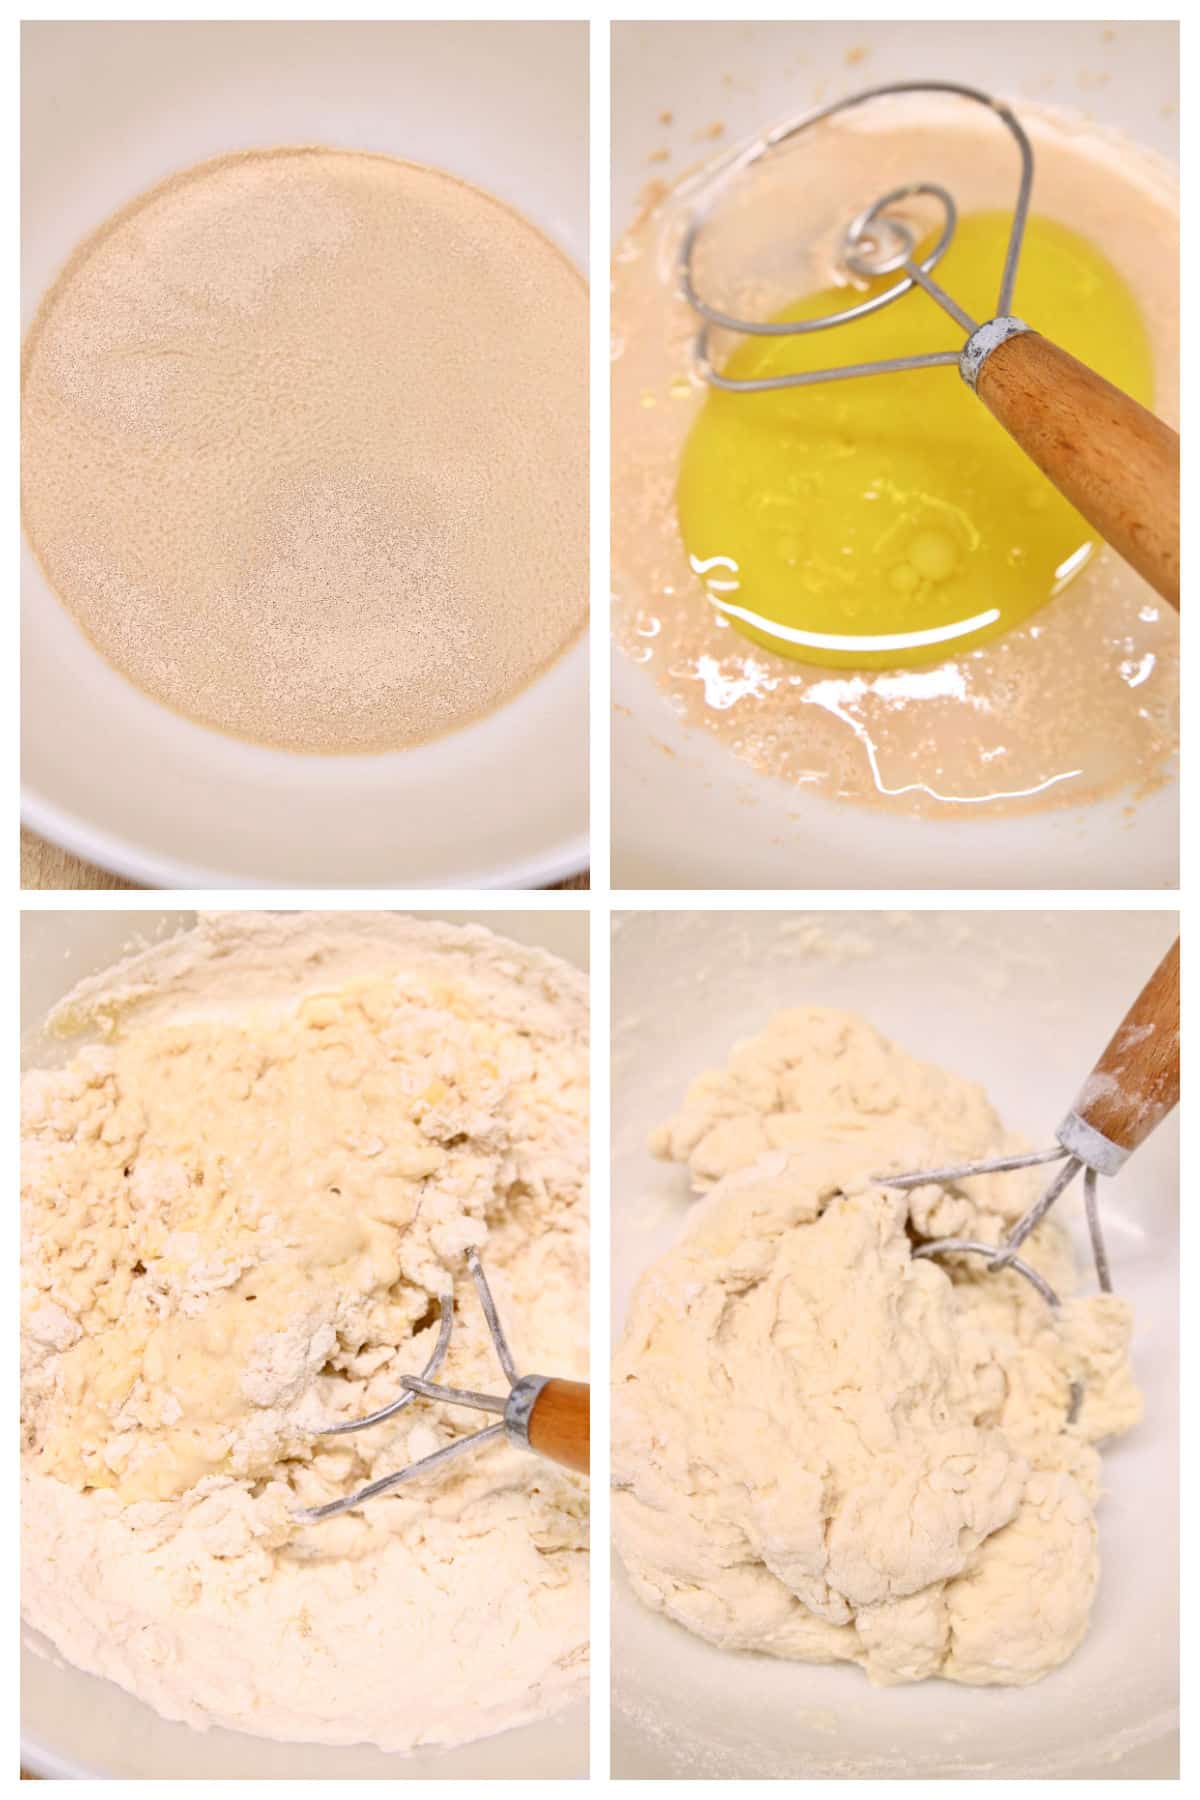 Making yeast dough collage.